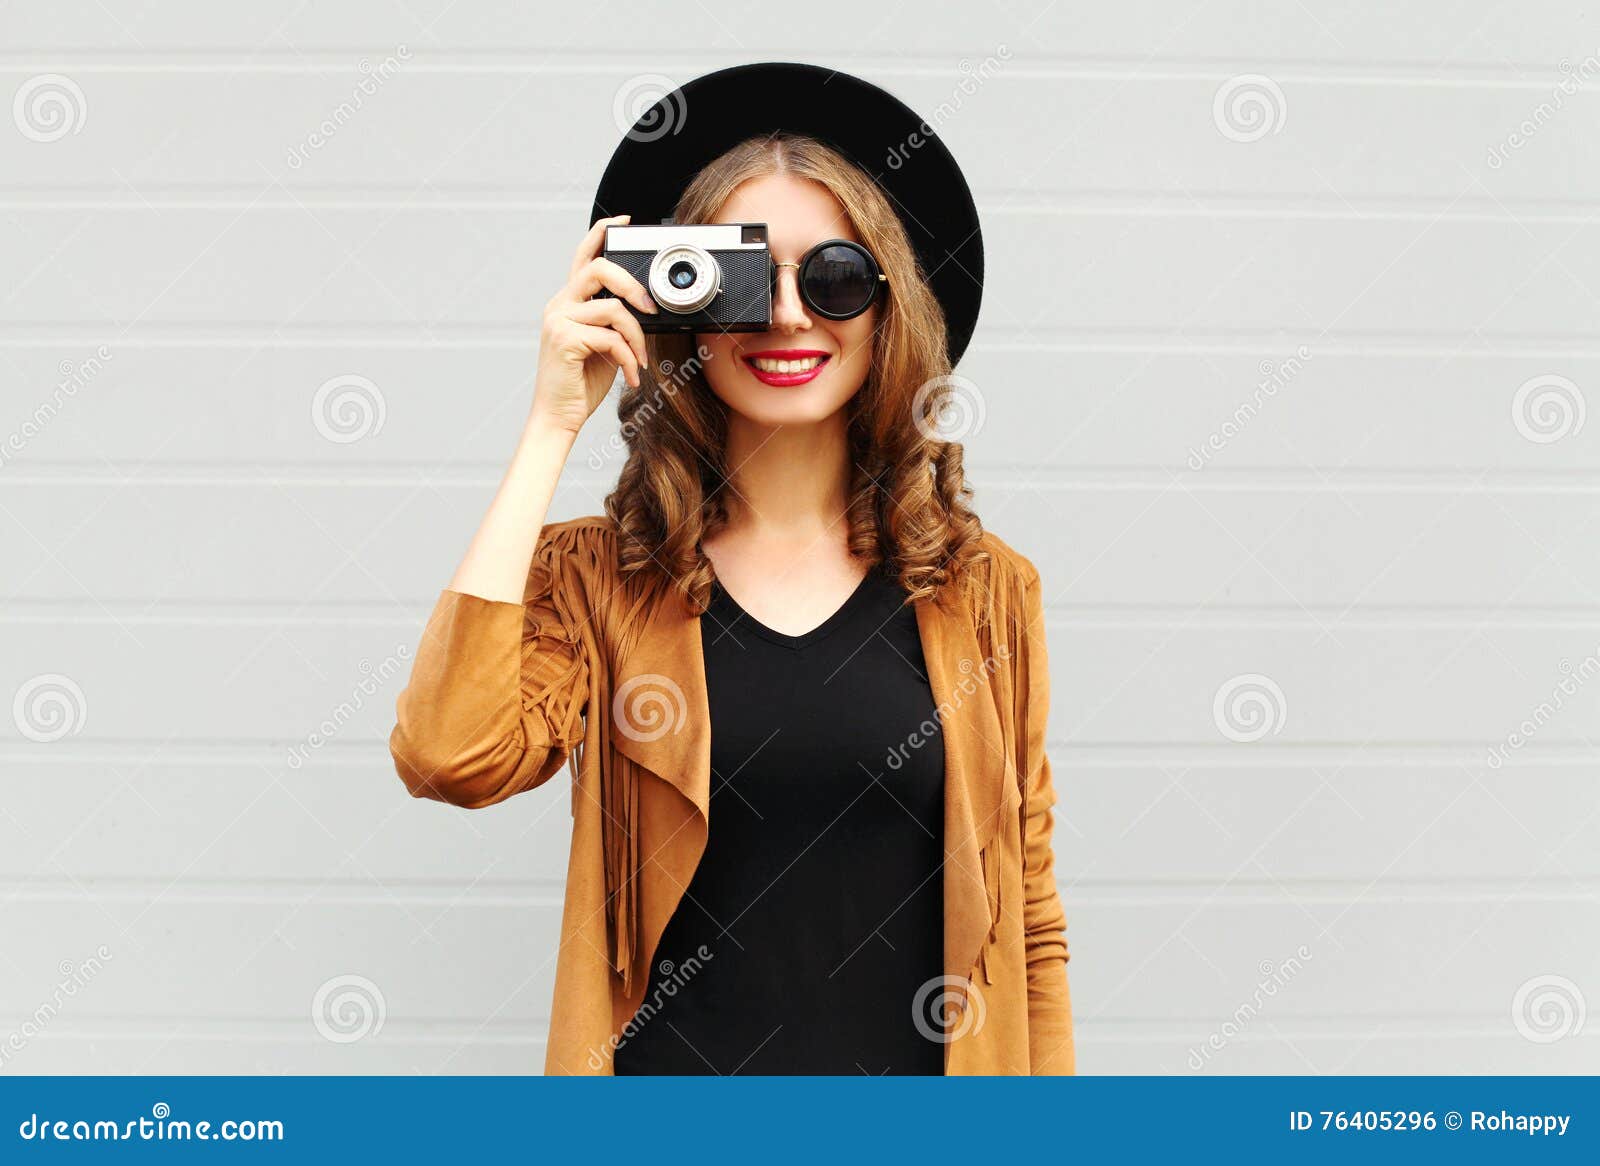 fashion look, pretty cool young woman model with retro film camera wearing a elegant hat, brown jacket, curly hair outdoors